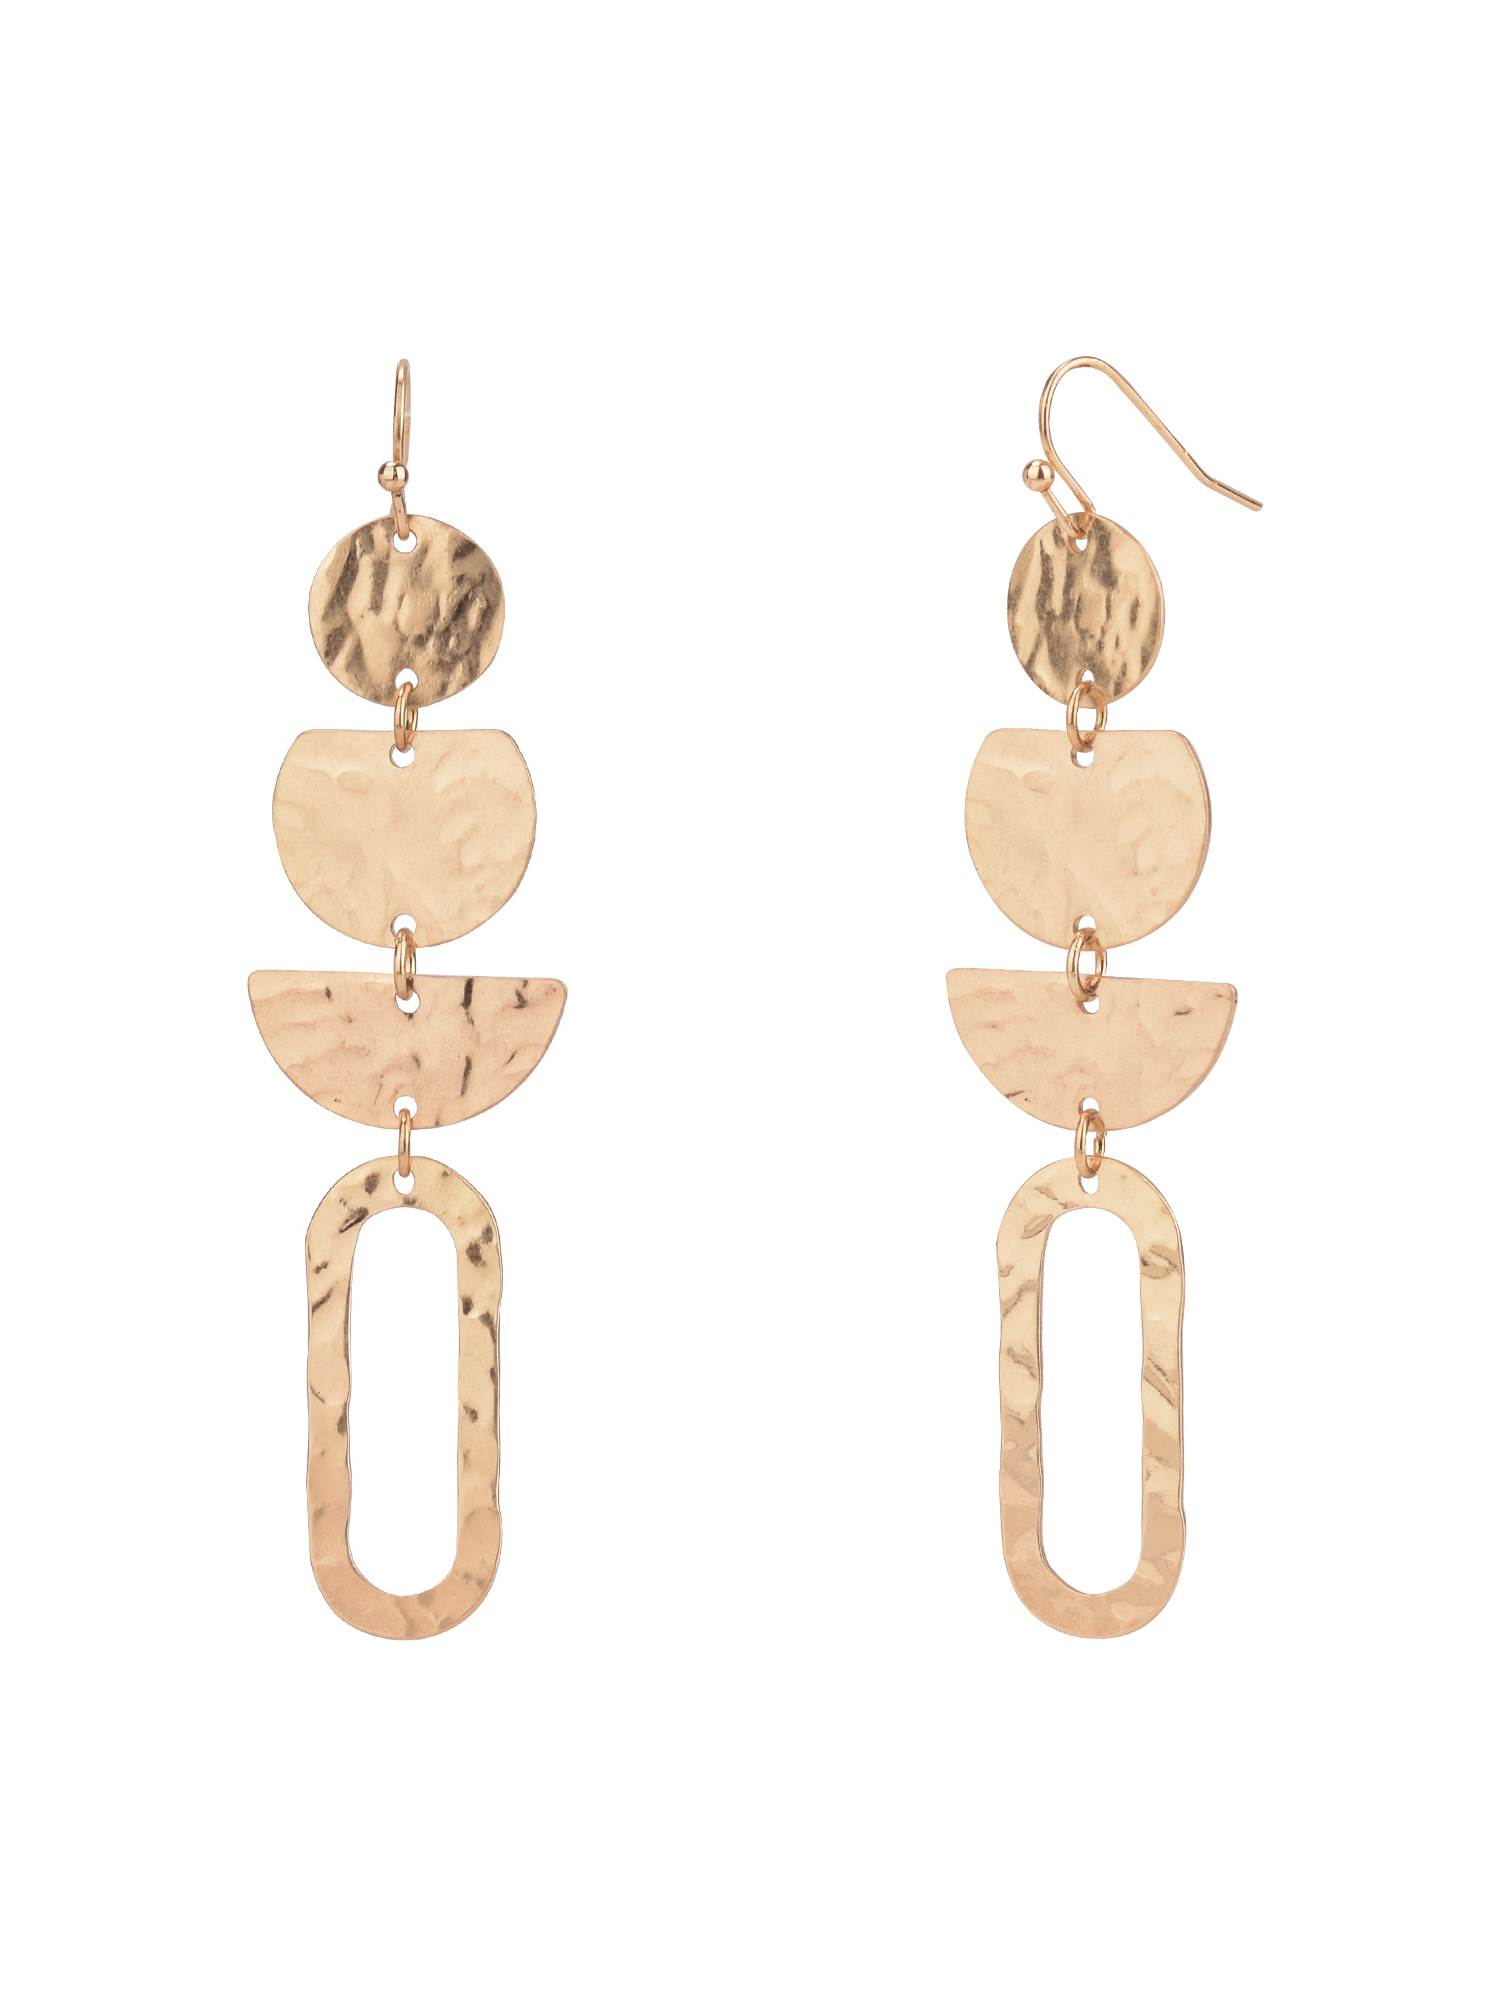 The Pioneer Woman - Women's Jewelry, Soft Silver-tone and Soft Gold-tone Metal Drop Duo Earring Set - image 4 of 6